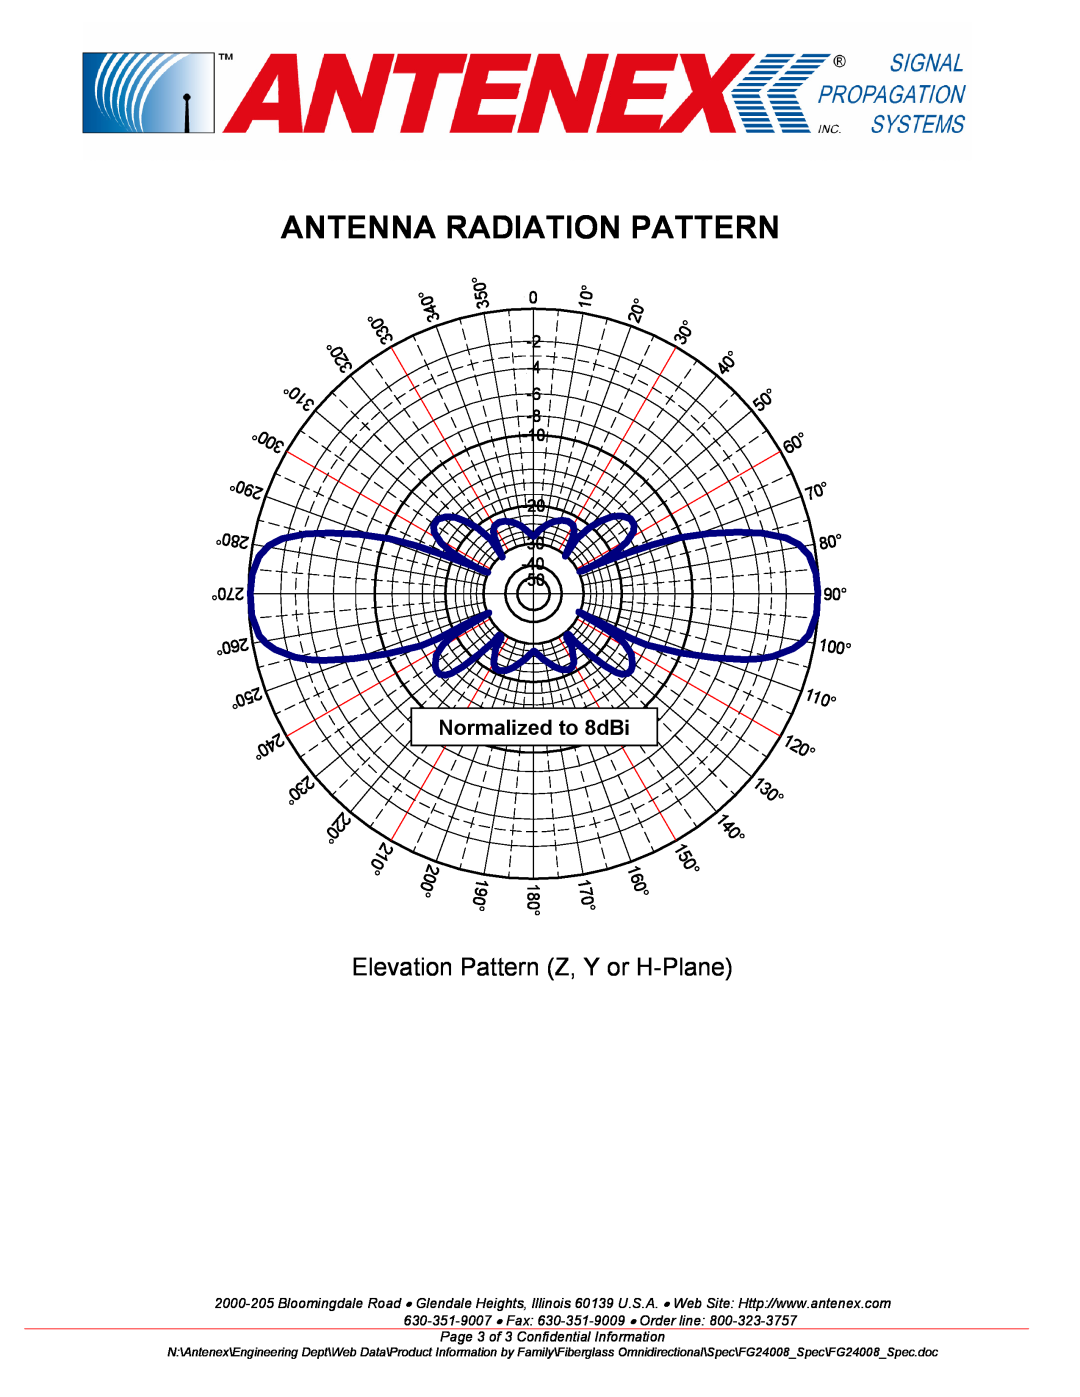 B&B Electronics FG24008 specifications Elevation Pattern Z, Y or H-Plane, Antenna Radiation Pattern, Normalized to 8dBi 